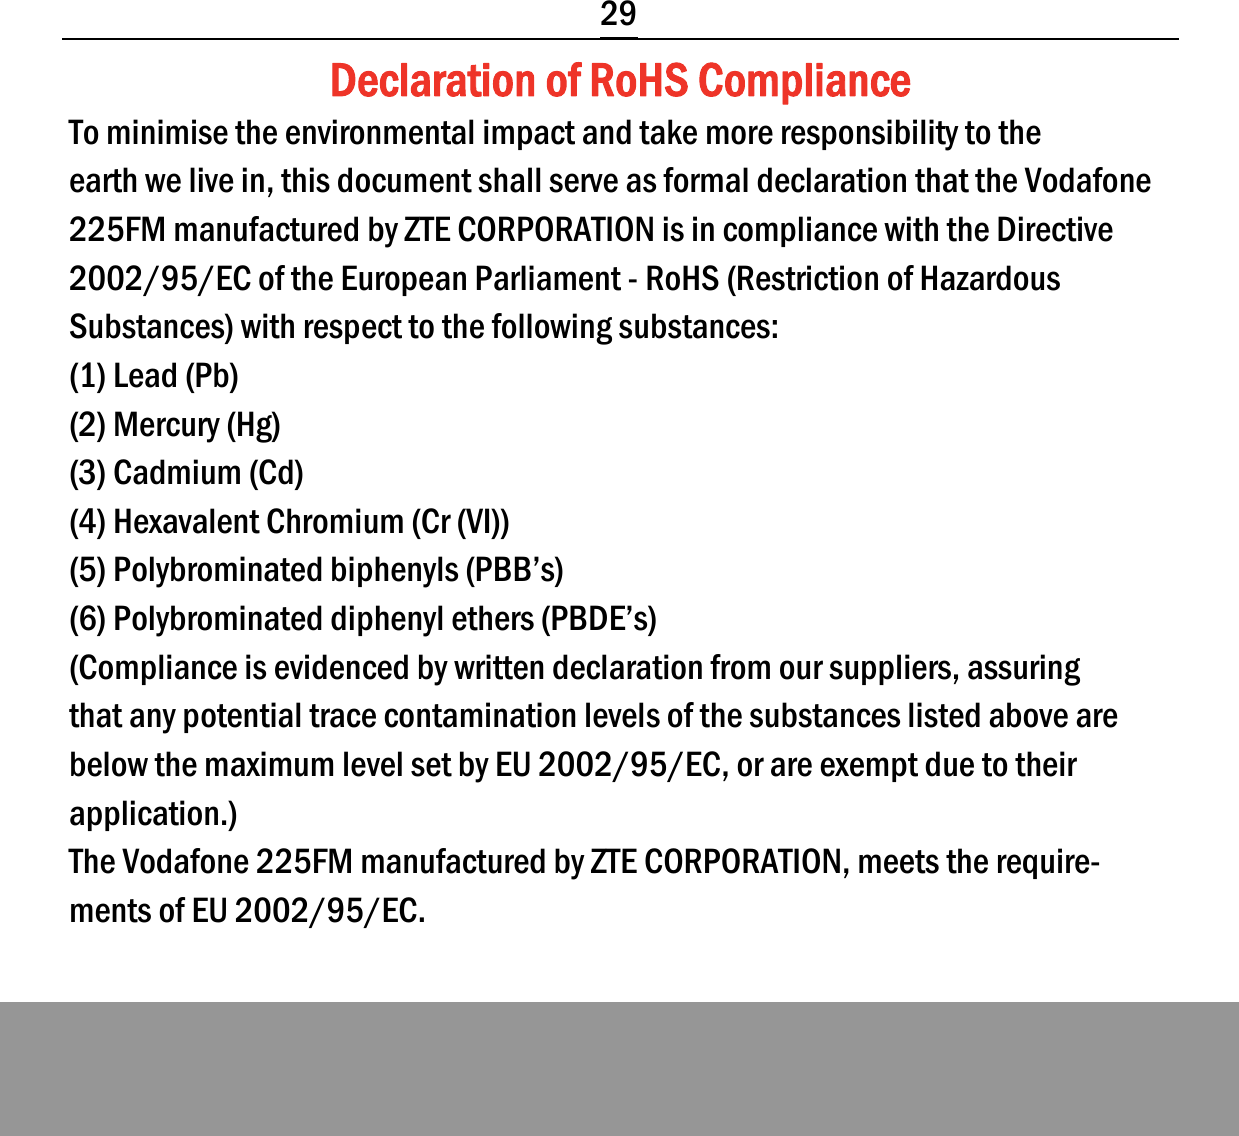  29 Declaration of RoHS Compliance To minimise the environmental impact and take more responsibility to the earth we live in, this document shall serve as formal declaration that the Vodafone 225FM manufactured by ZTE CORPORATION is in compliance with the Directive 2002/95/EC of the European Parliament - RoHS (Restriction of Hazardous Substances) with respect to the following substances: (1) Lead (Pb) (2) Mercury (Hg) (3) Cadmium (Cd) (4) Hexavalent Chromium (Cr (VI)) (5) Polybrominated biphenyls (PBB’s) (6) Polybrominated diphenyl ethers (PBDE’s) (Compliance is evidenced by written declaration from our suppliers, assuring that any potential trace contamination levels of the substances listed above are below the maximum level set by EU 2002/95/EC, or are exempt due to their application.) The Vodafone 225FM manufactured by ZTE CORPORATION, meets the require-ments of EU 2002/95/EC.           